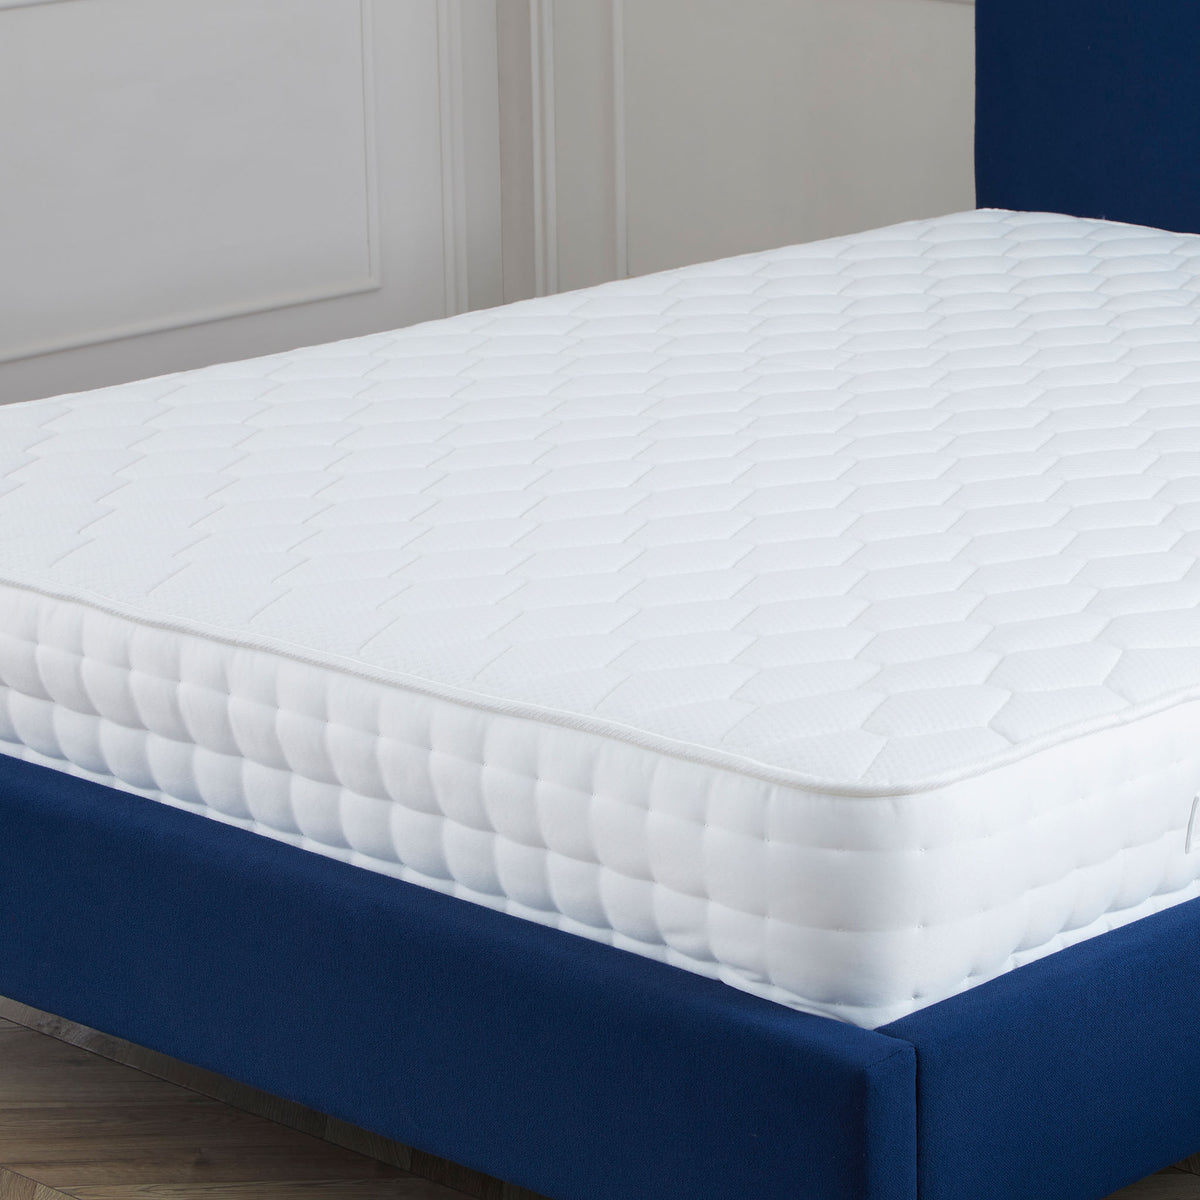 Roseland Sleep Classic Pocket Sprung Memory Foam Quilted Mattress lifestyle close up